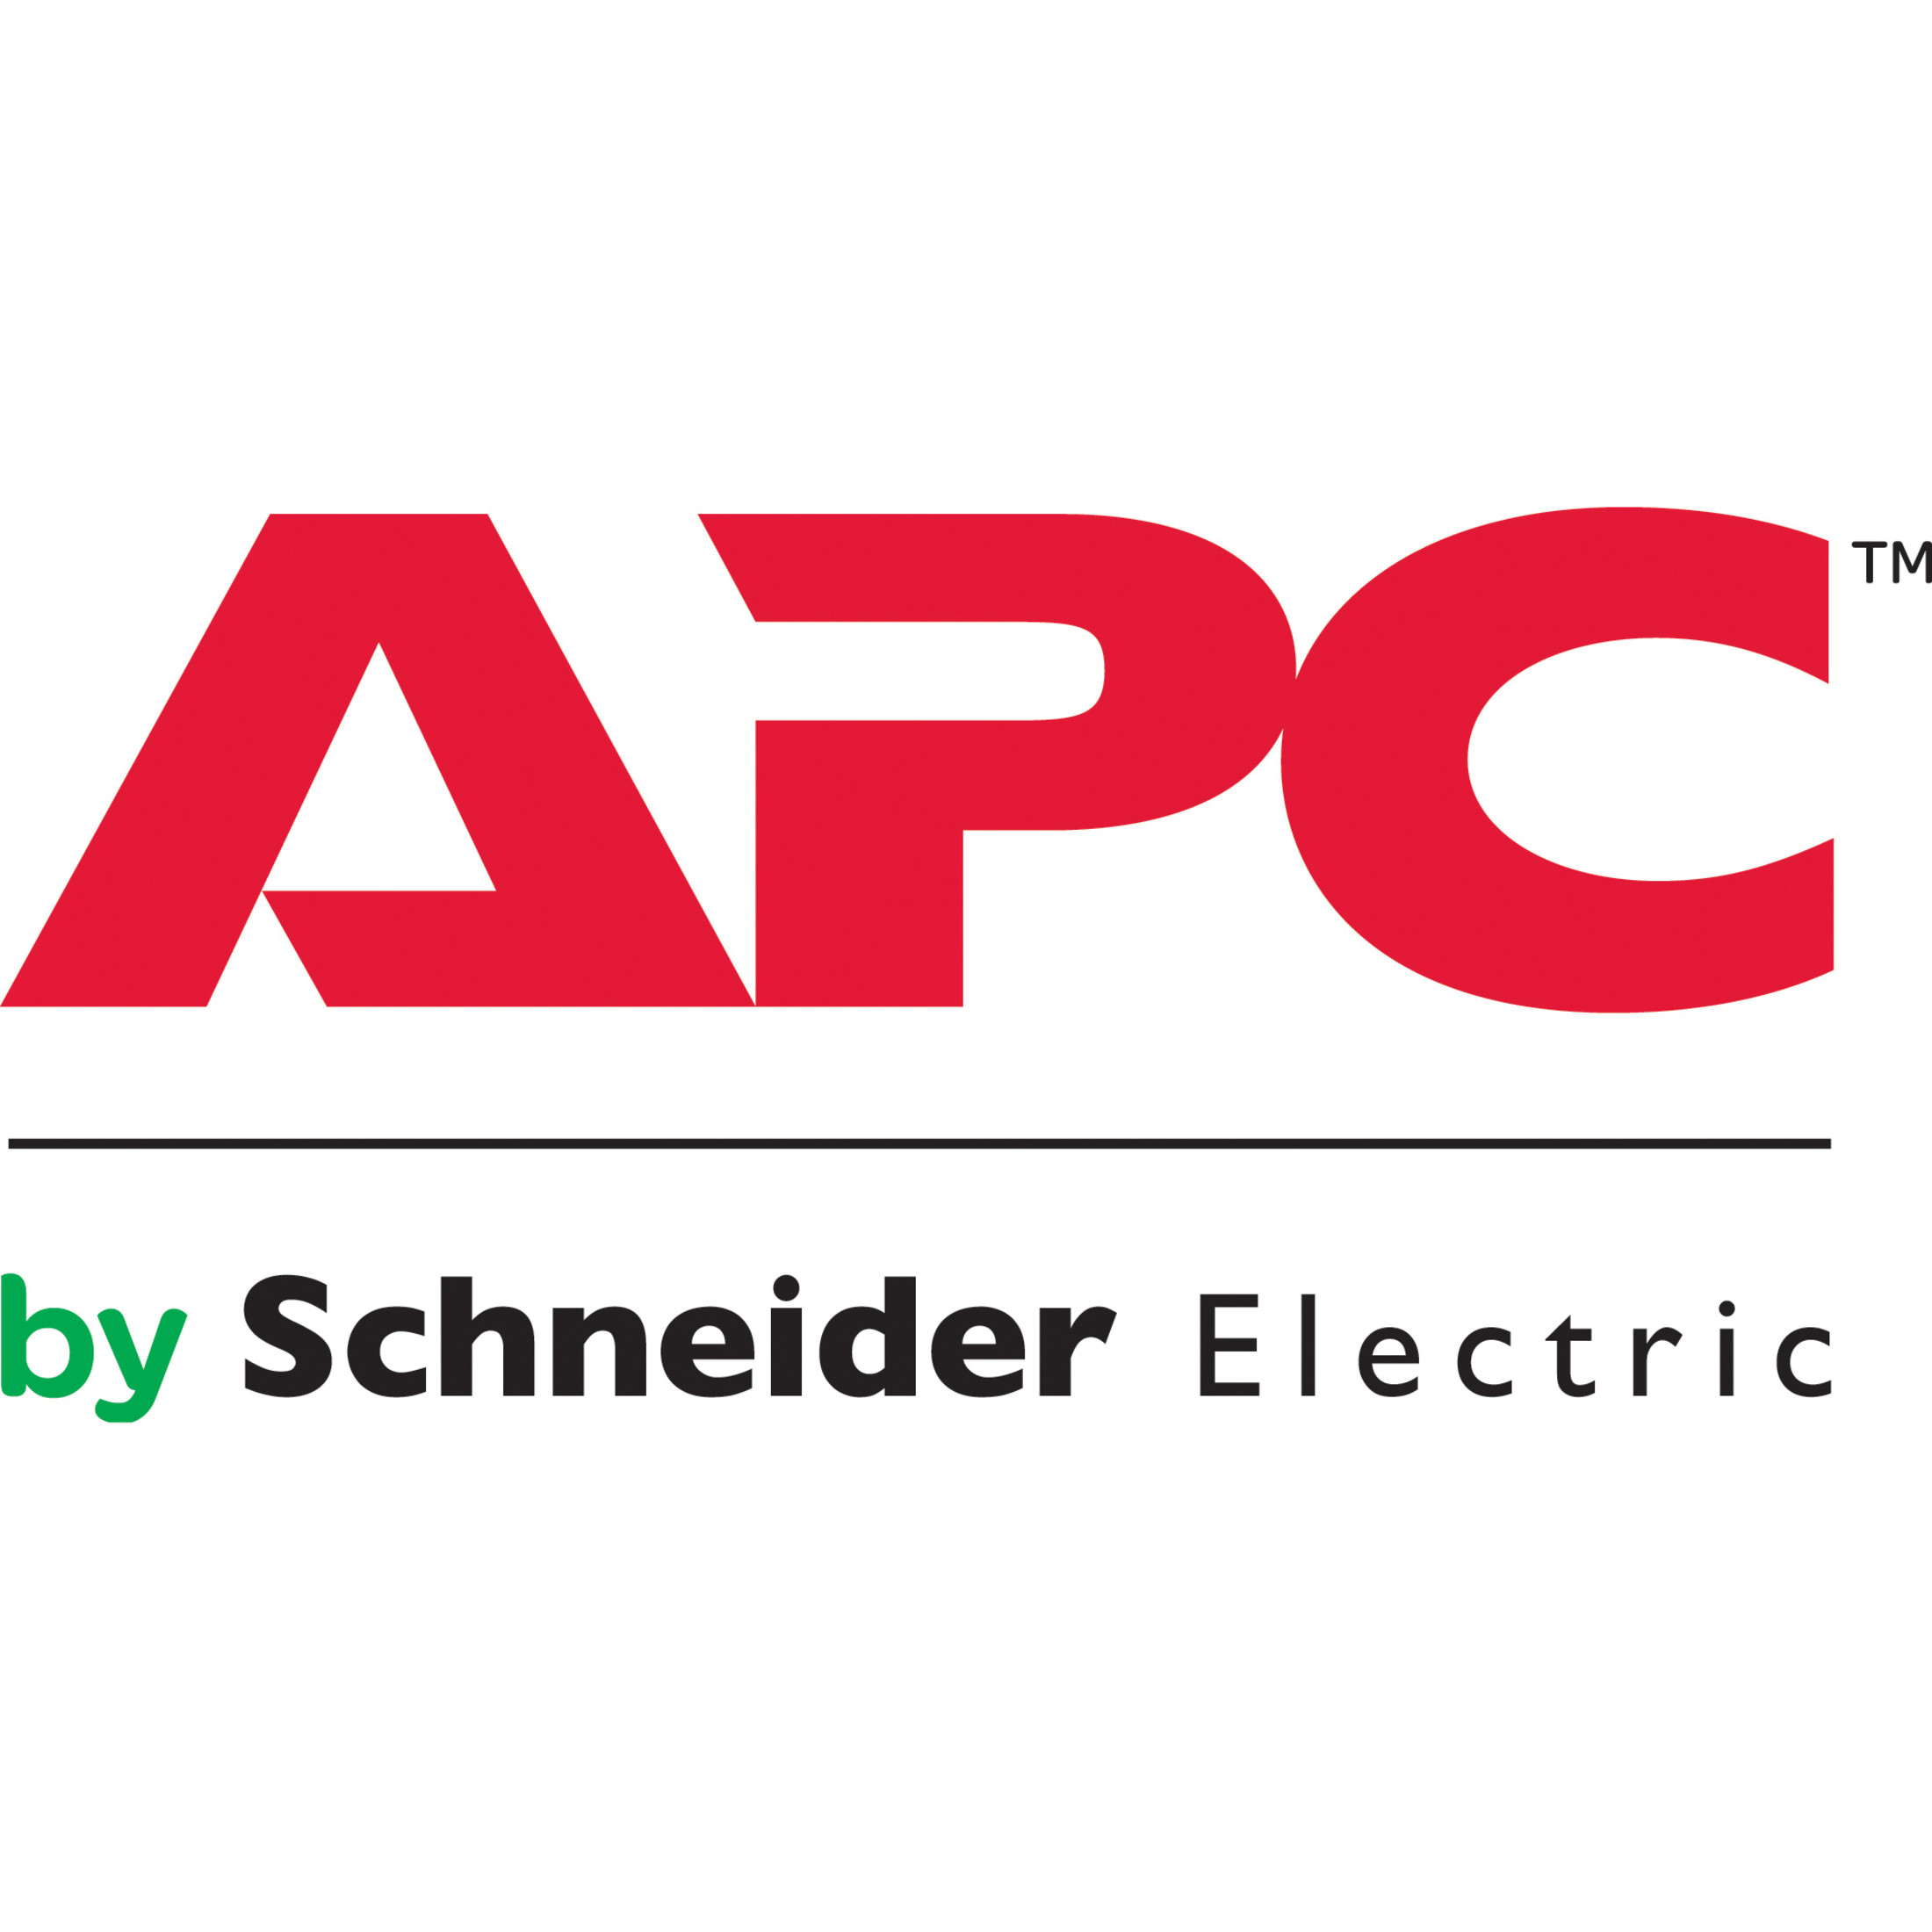 APC by Schneider Electric Data Center Operation IT OptimizeLicense5000 Rack AP91605000